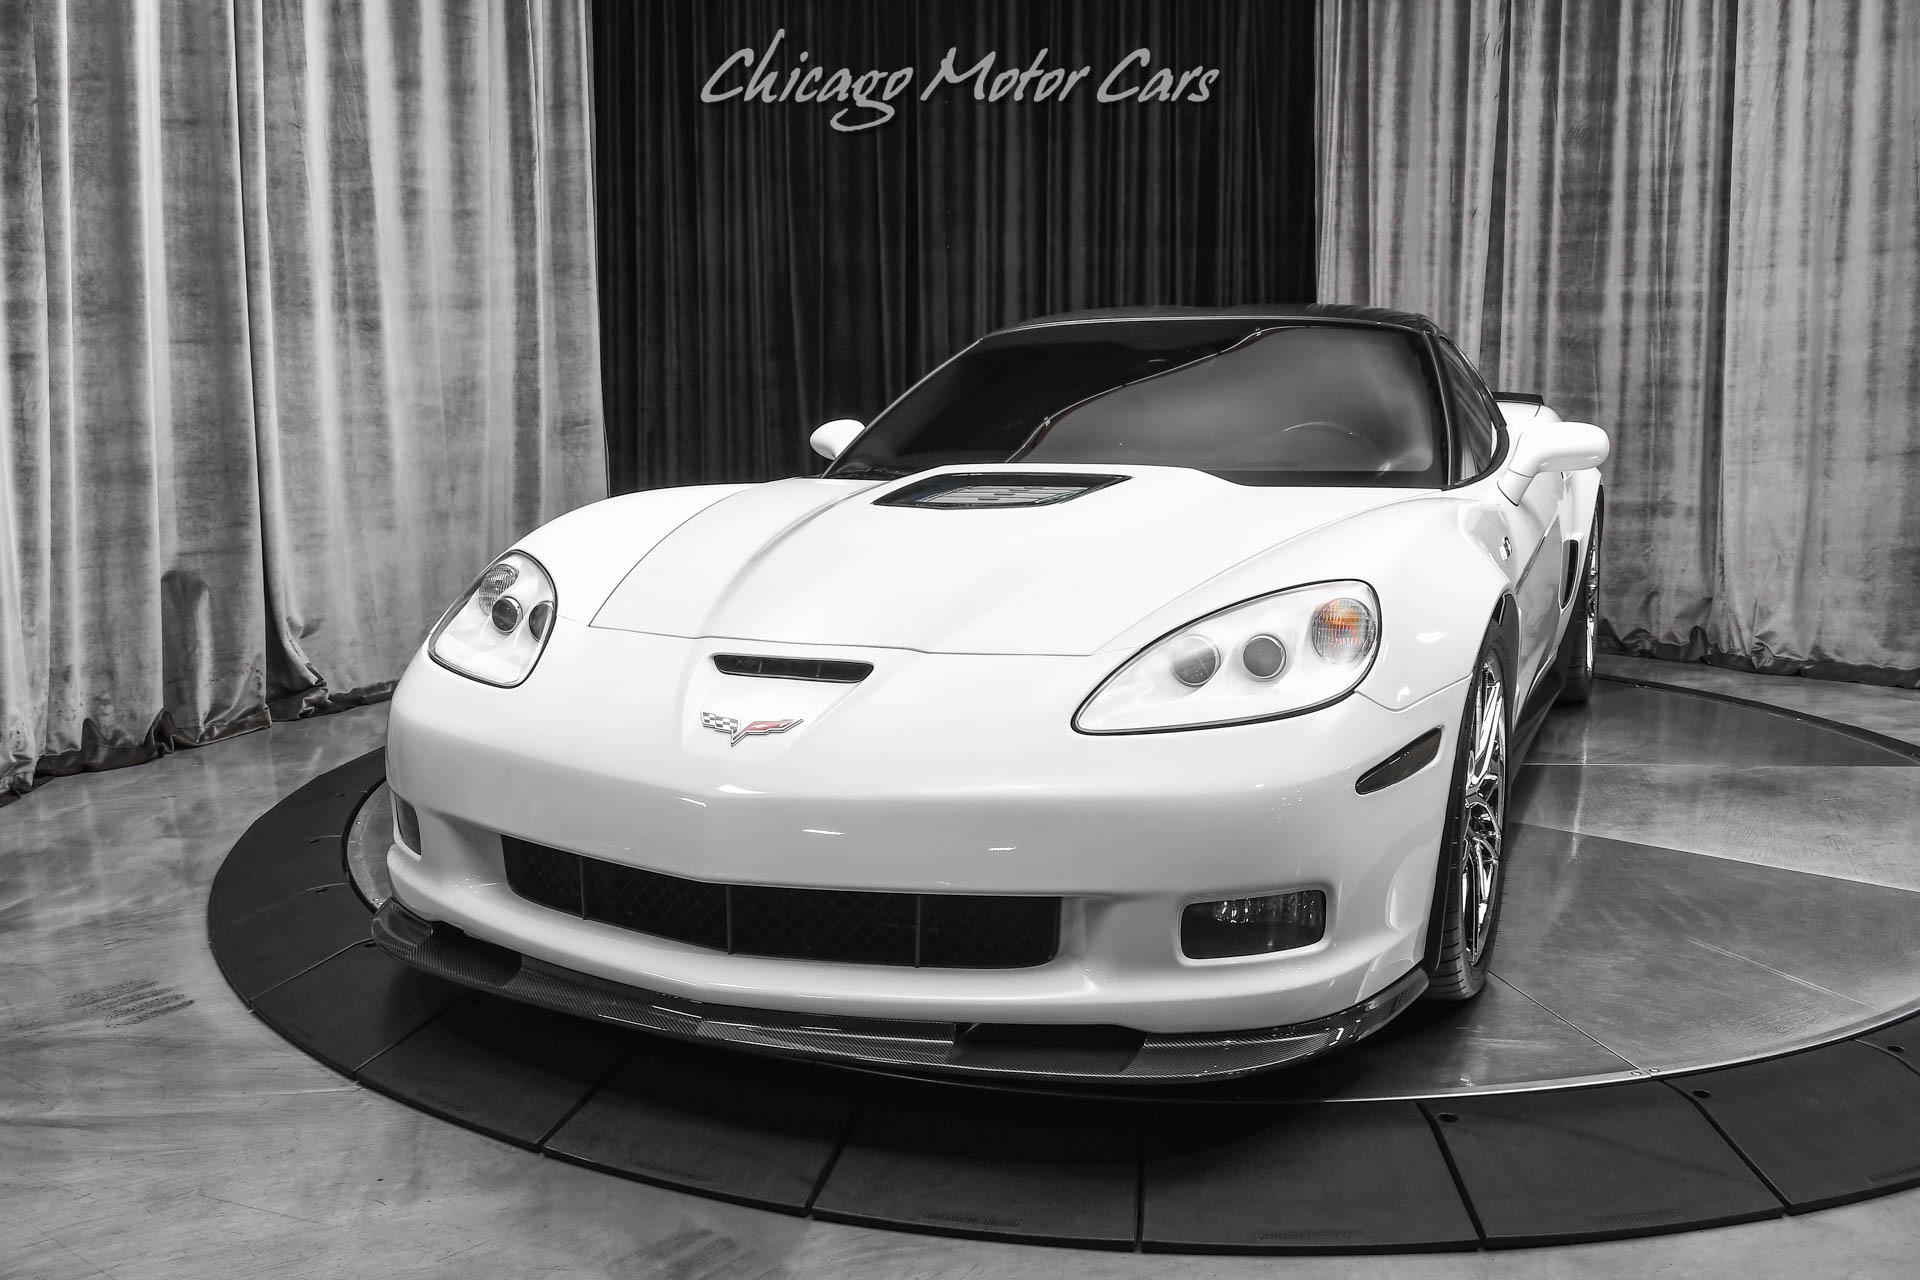 Used-2011-Chevrolet-Corvette-ZR1-3ZR-Coupe-Arctic-White-ONLY-15k-Miles-TASTEFUL-Upgrades-755-WHP